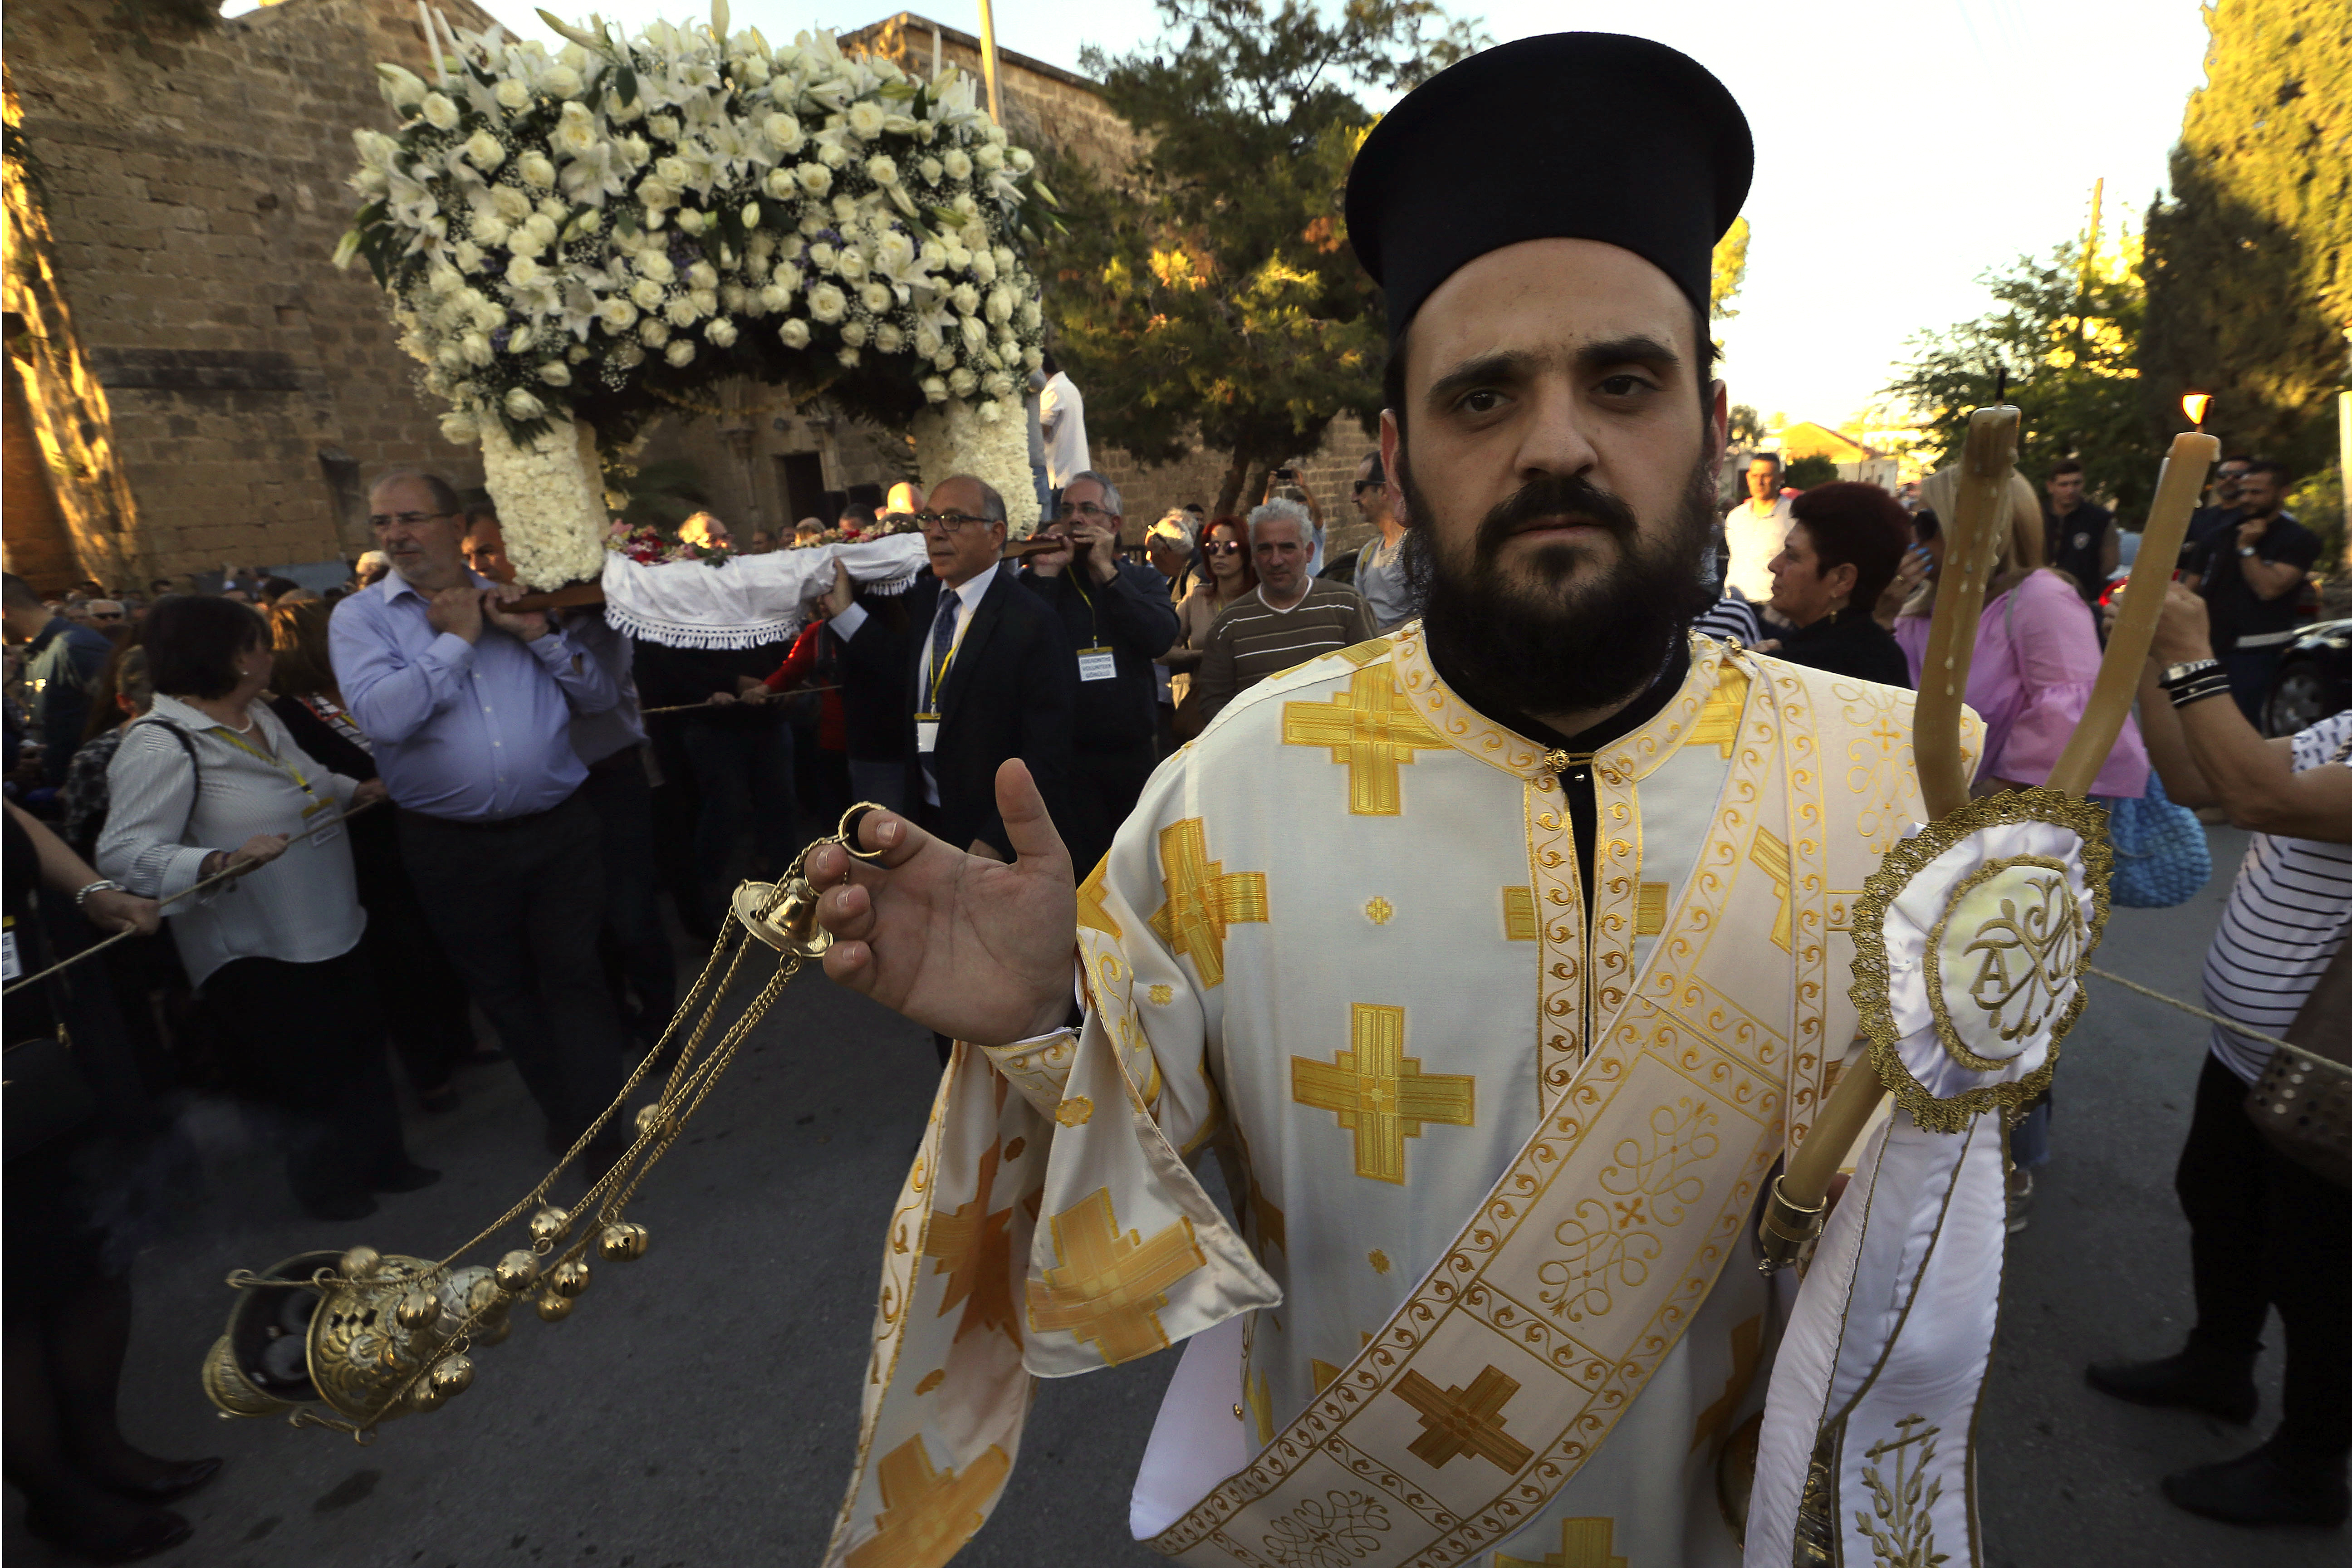 A Greek Orthodox Christian Priest holds candles during the Good Friday procession of the Epitaphios, at the church of Saint George Exorinos within the ancient walls of Famagusta city, Cyprus, on Friday, April 6, 2018. According to Orthodox tradition, the faithful follow the Epitaphios which rests under a flower-adorned canopy in procession around the church to commemorate Christ's funeral procession. This is one of the few times in recent years where Turkish Cypriot authorities have permitted liturgical services at the 14th Century church since the island was divided in 1974 when Turkey invaded following a coup by supporters of union with Greece. (AP Photo/Petros Karadjias)